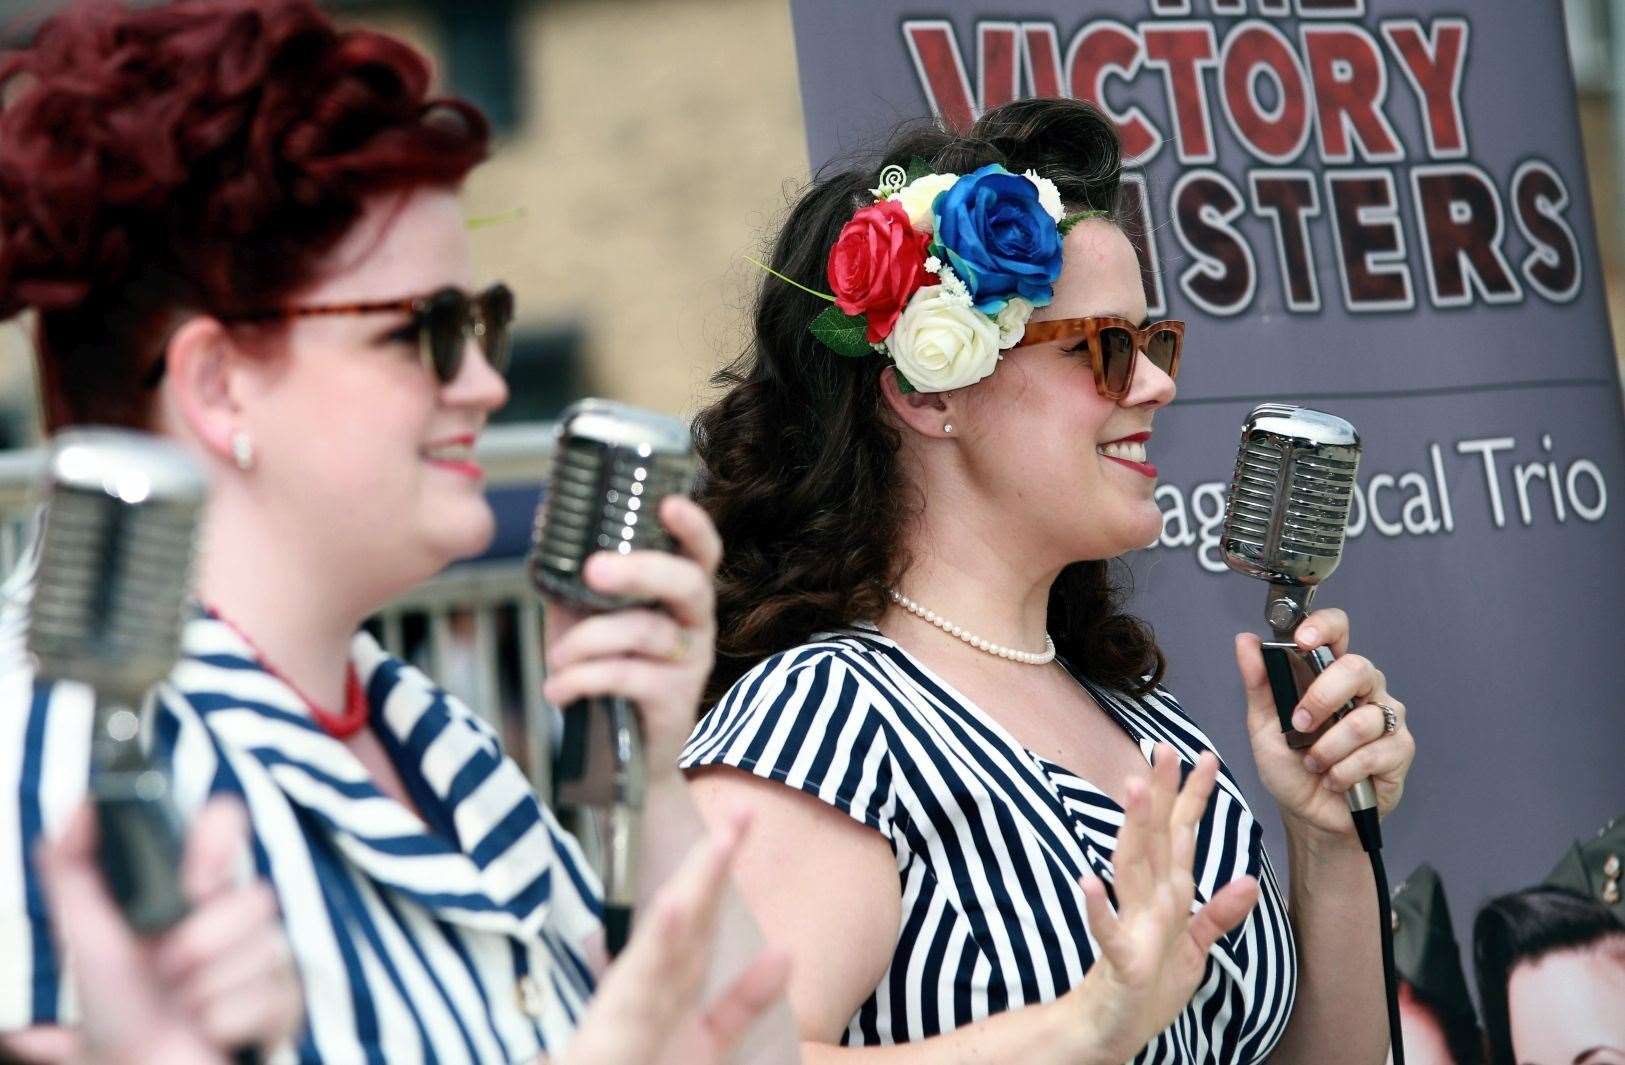 The Victory Sisters sang classic songs from the 1930s and 1940s. Picture: Cohesion Plus